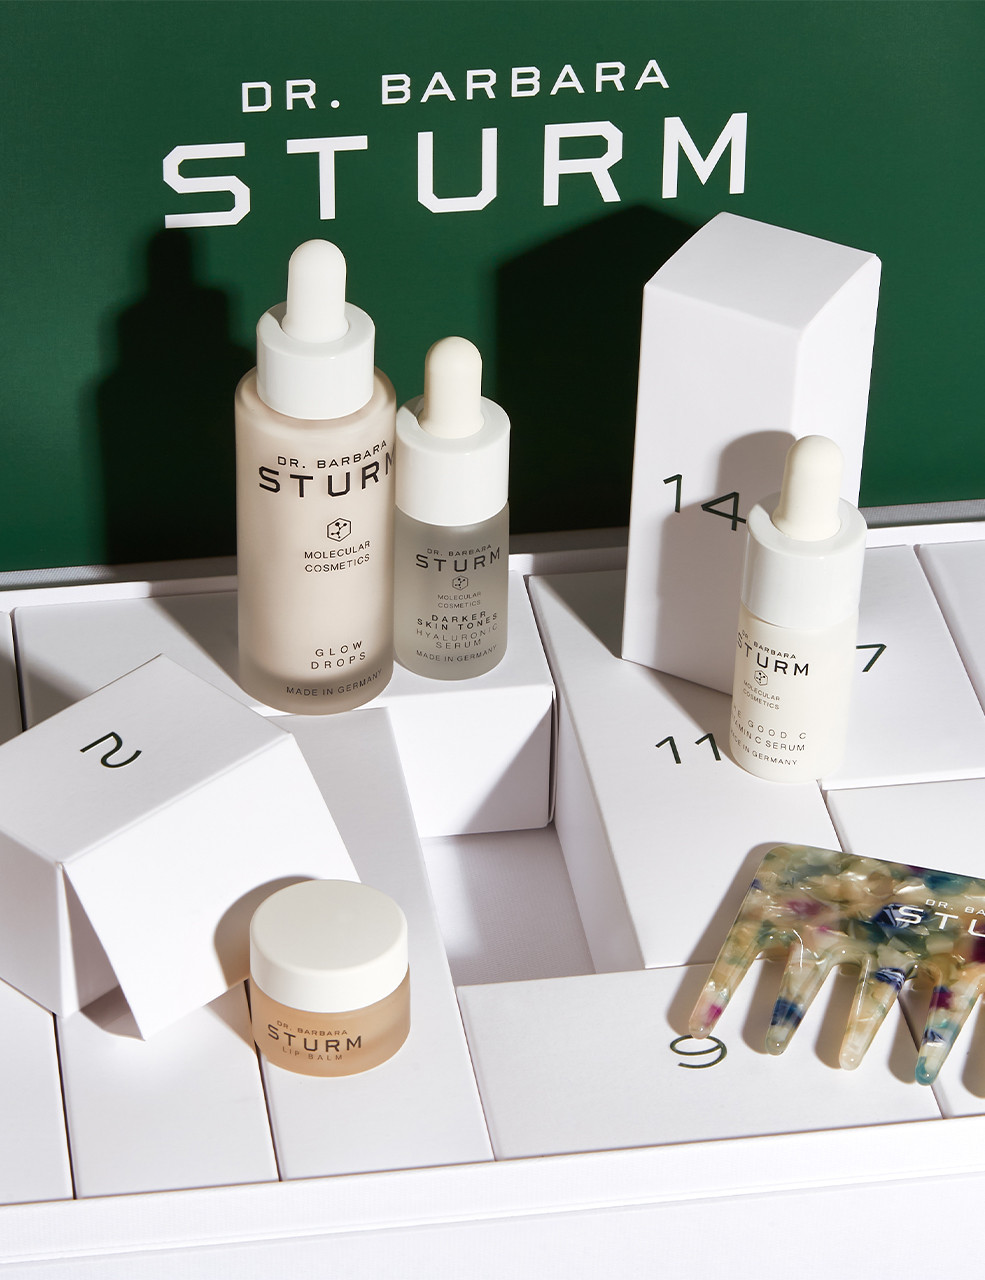 The ADVENT CALENDAR features a selection of Dr. Sturm’s most loved products